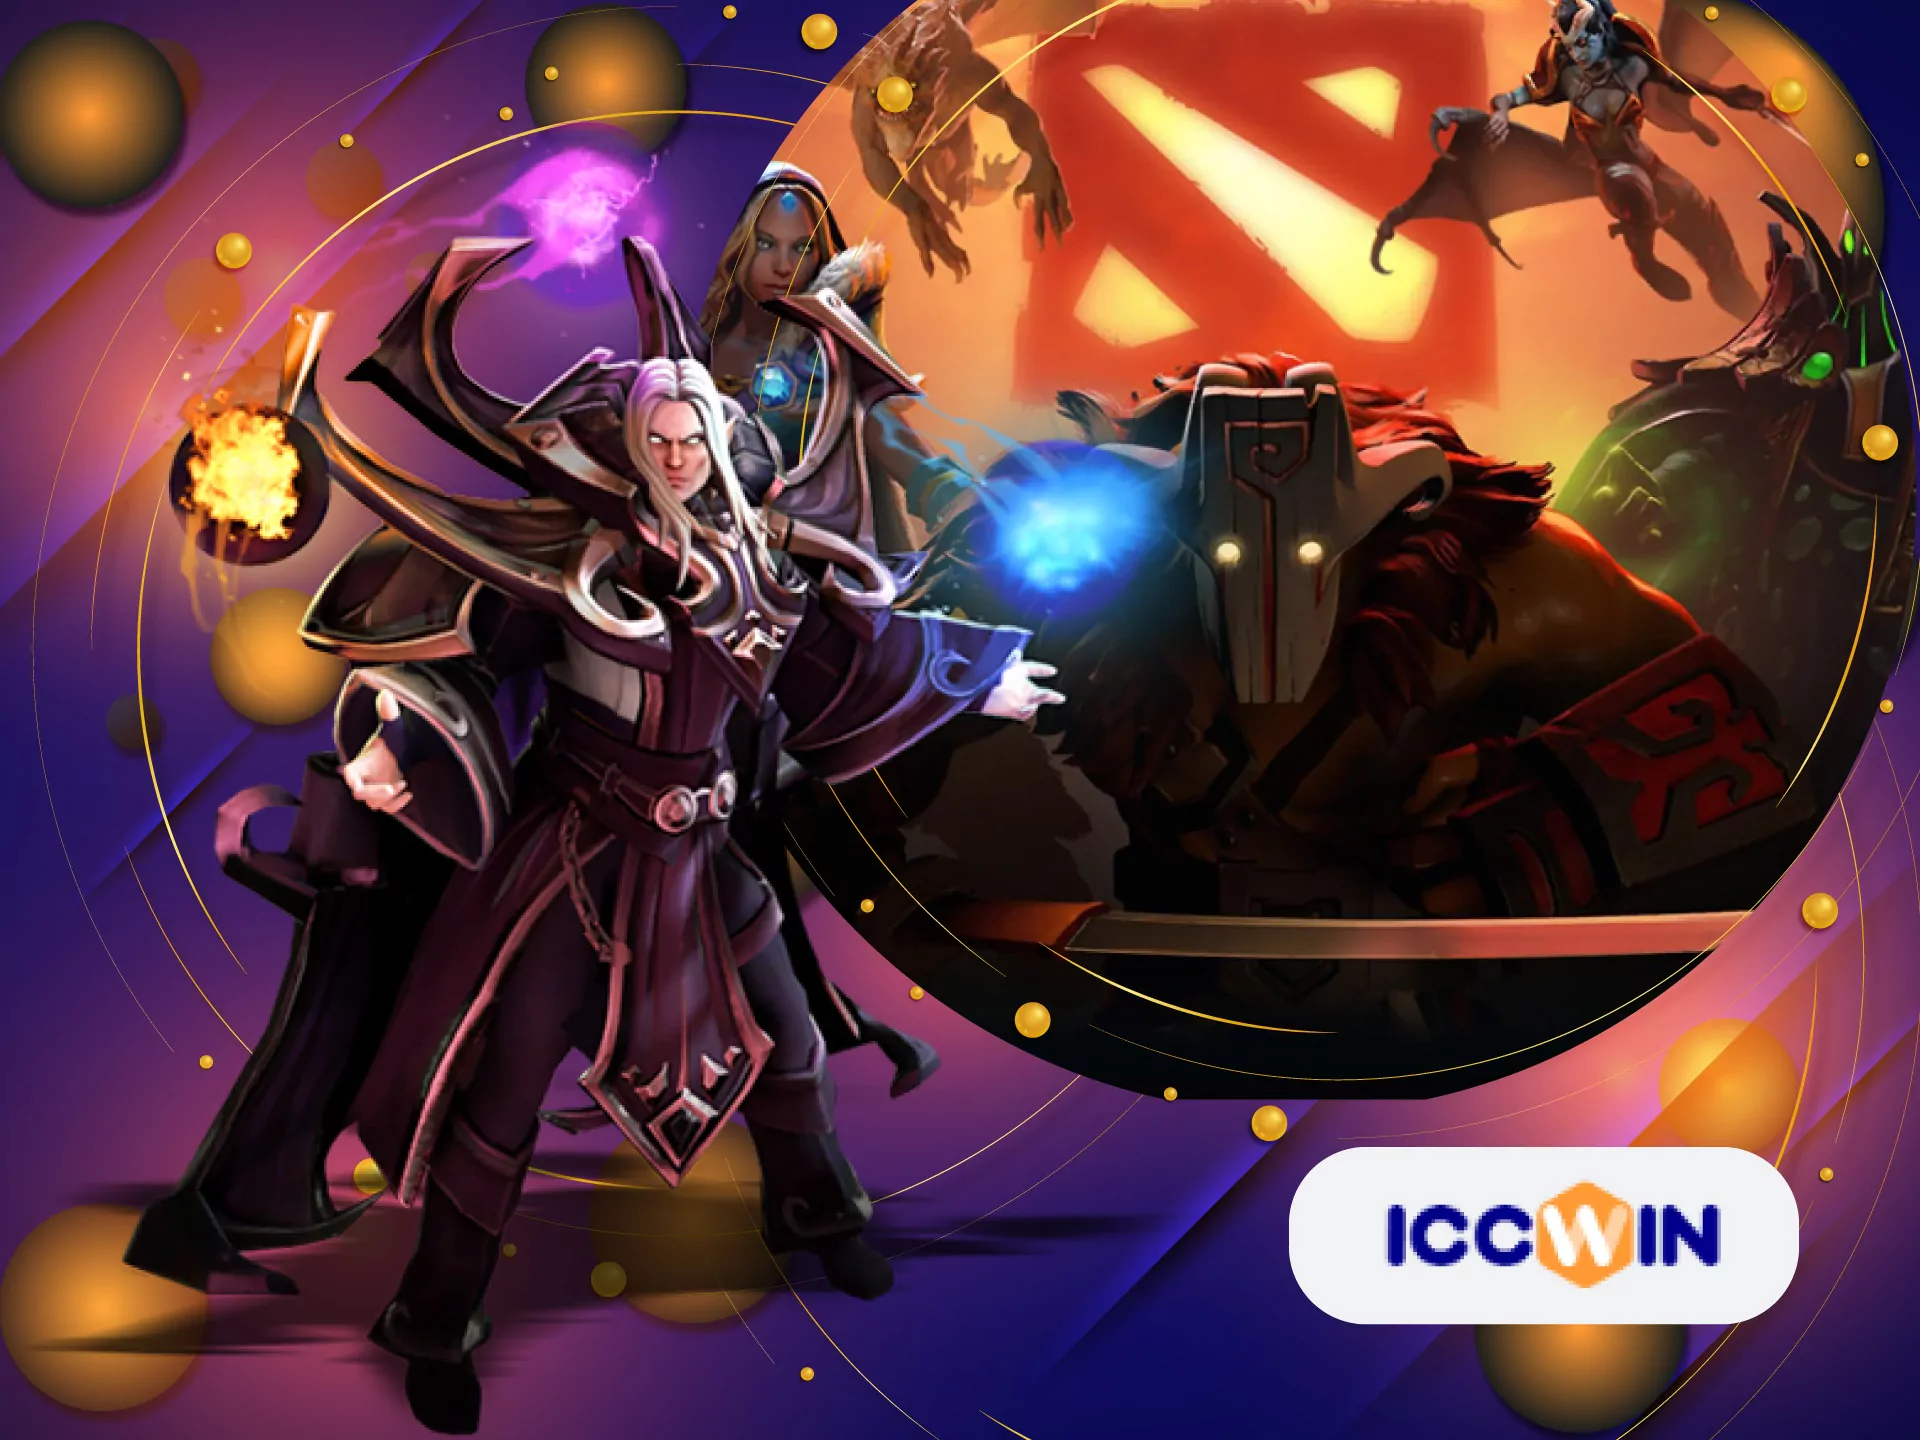 ICCWIN also offers betting on DOTA 2.